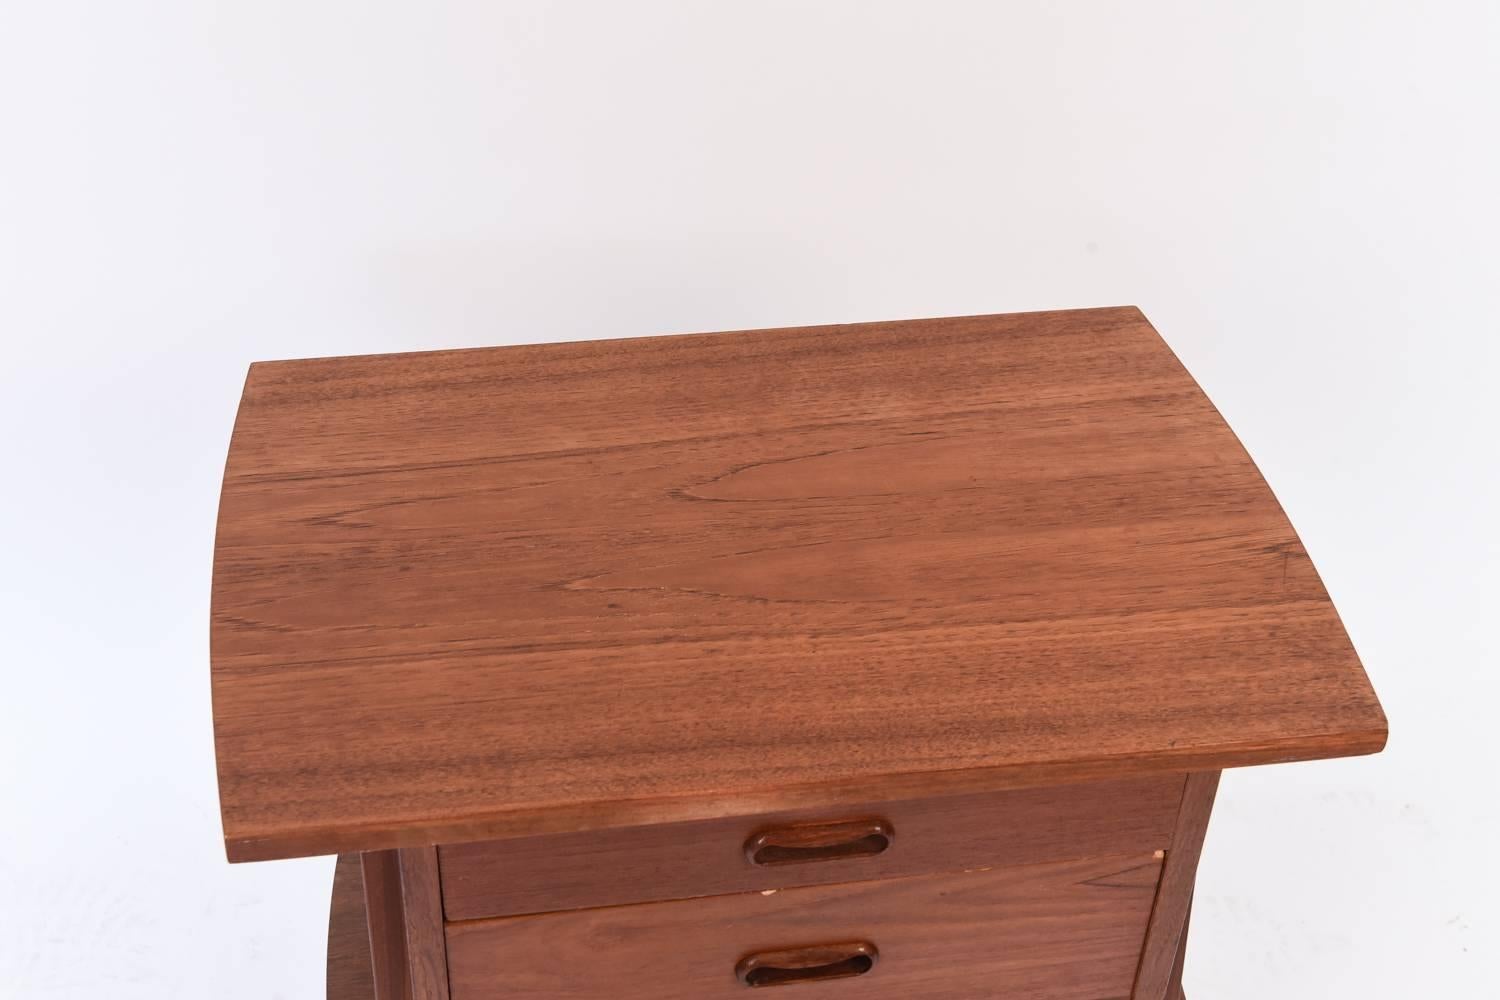 This Danish midcentury teak sewing table features two drawers with recessed handles for storage. Would be a charming side table or nightstand.